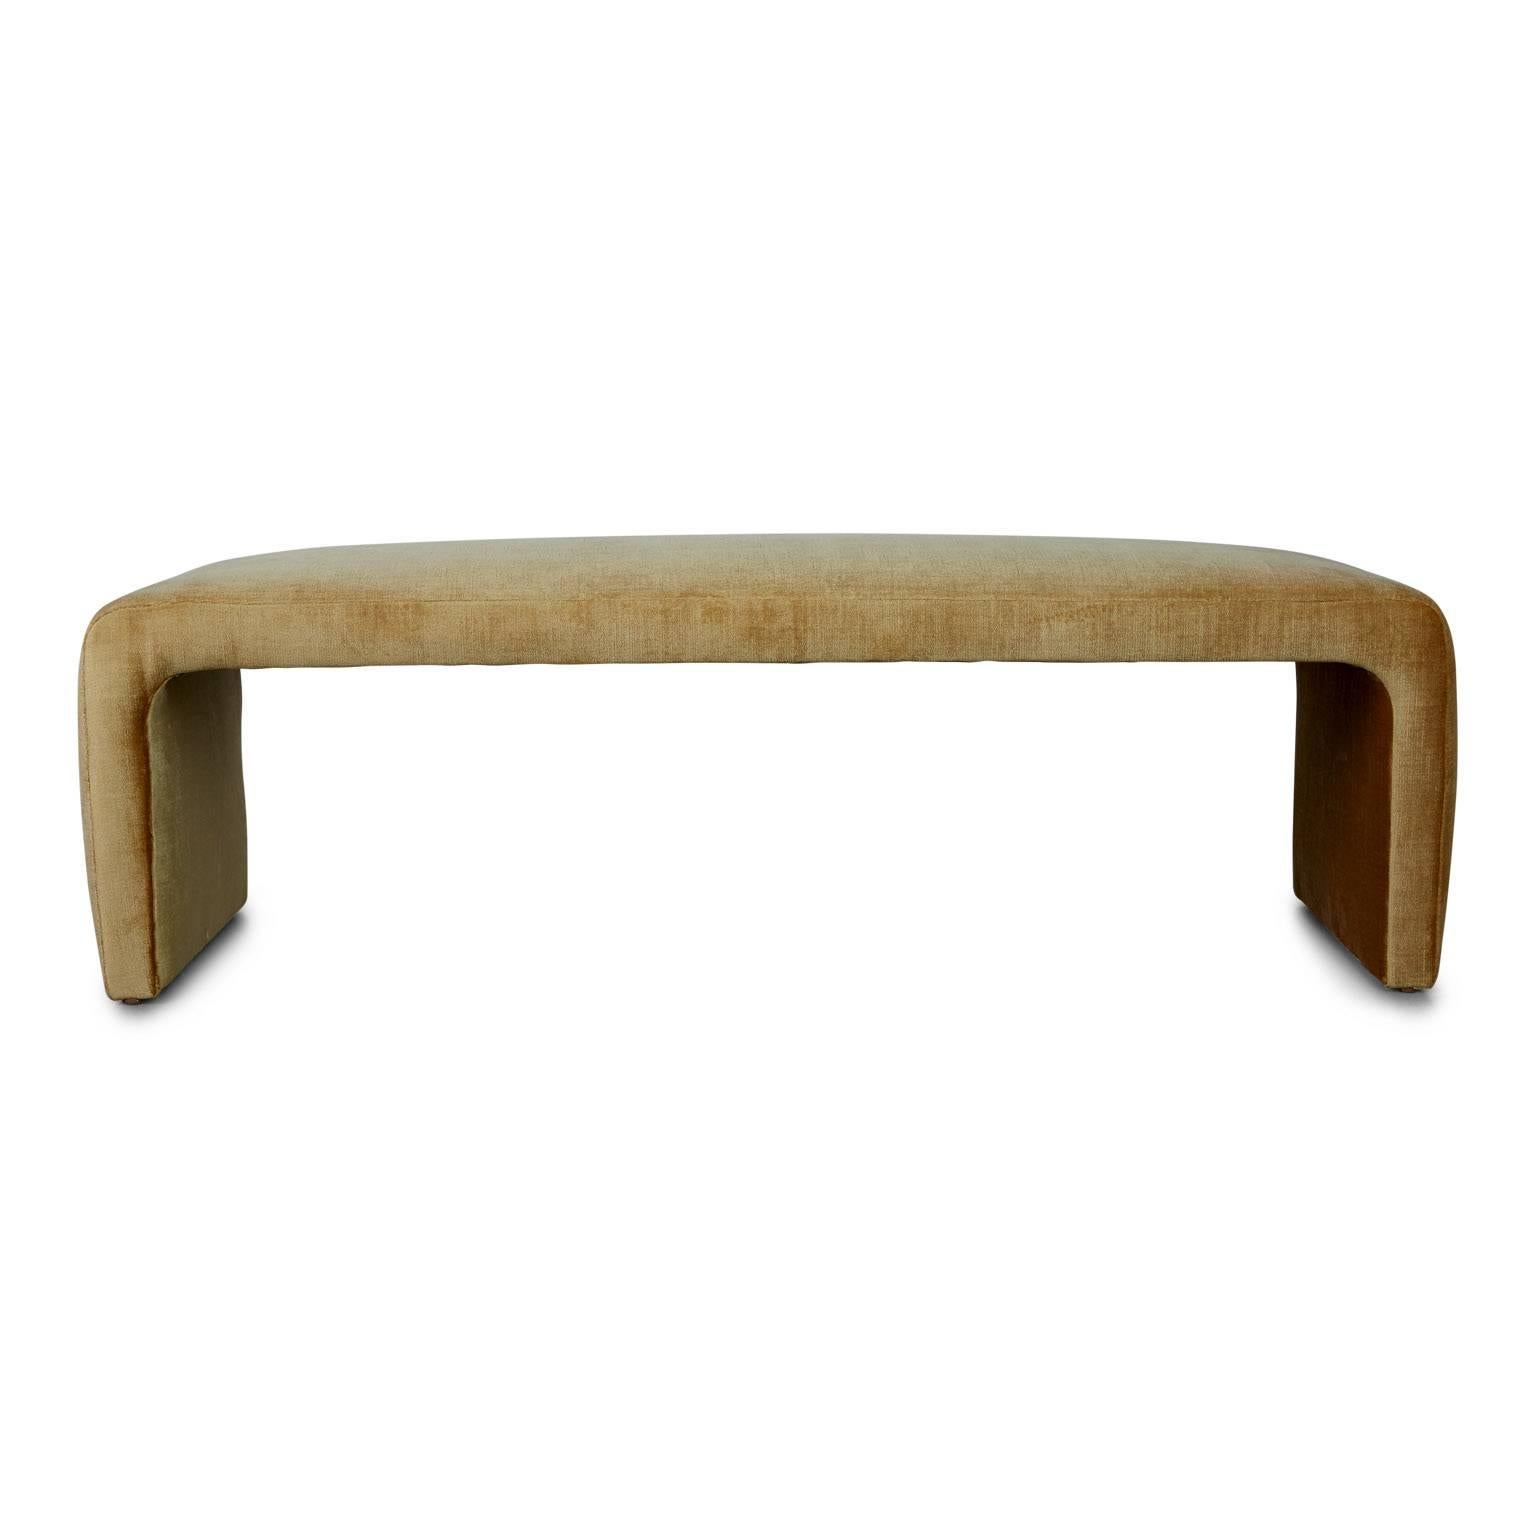 Lustrous pair of waterfall style benches that have been newly upholstered in high-end Schumacher gold cotton velvet. The simple clean lines of these benches along with their high end choice of upholstery fabric in one of the hottest interiors colors